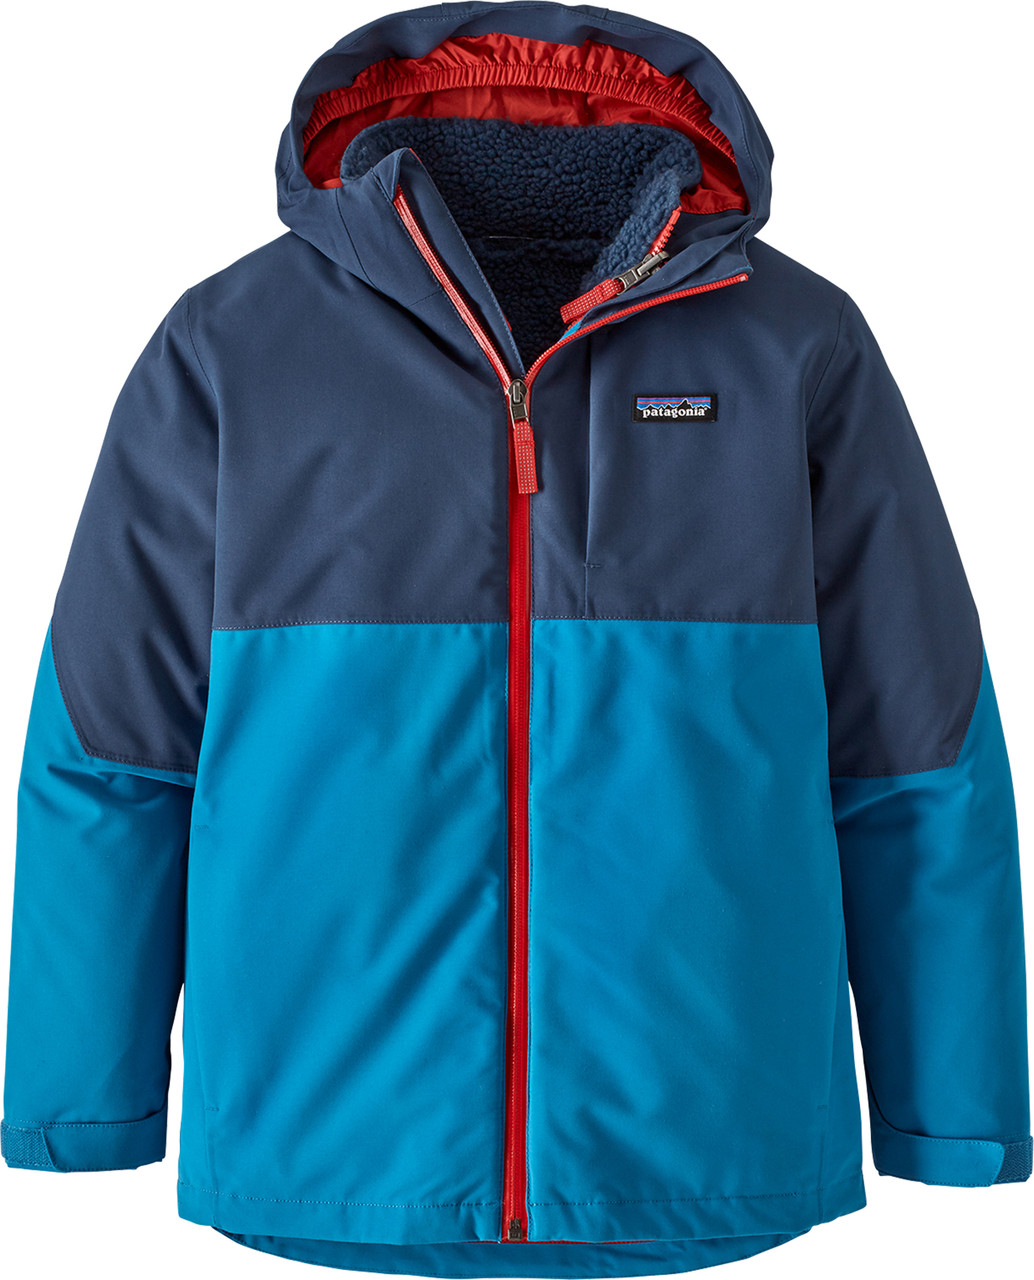 Patagonia 4-in-1 Everyday Jacket - Boys' - Youths | MEC